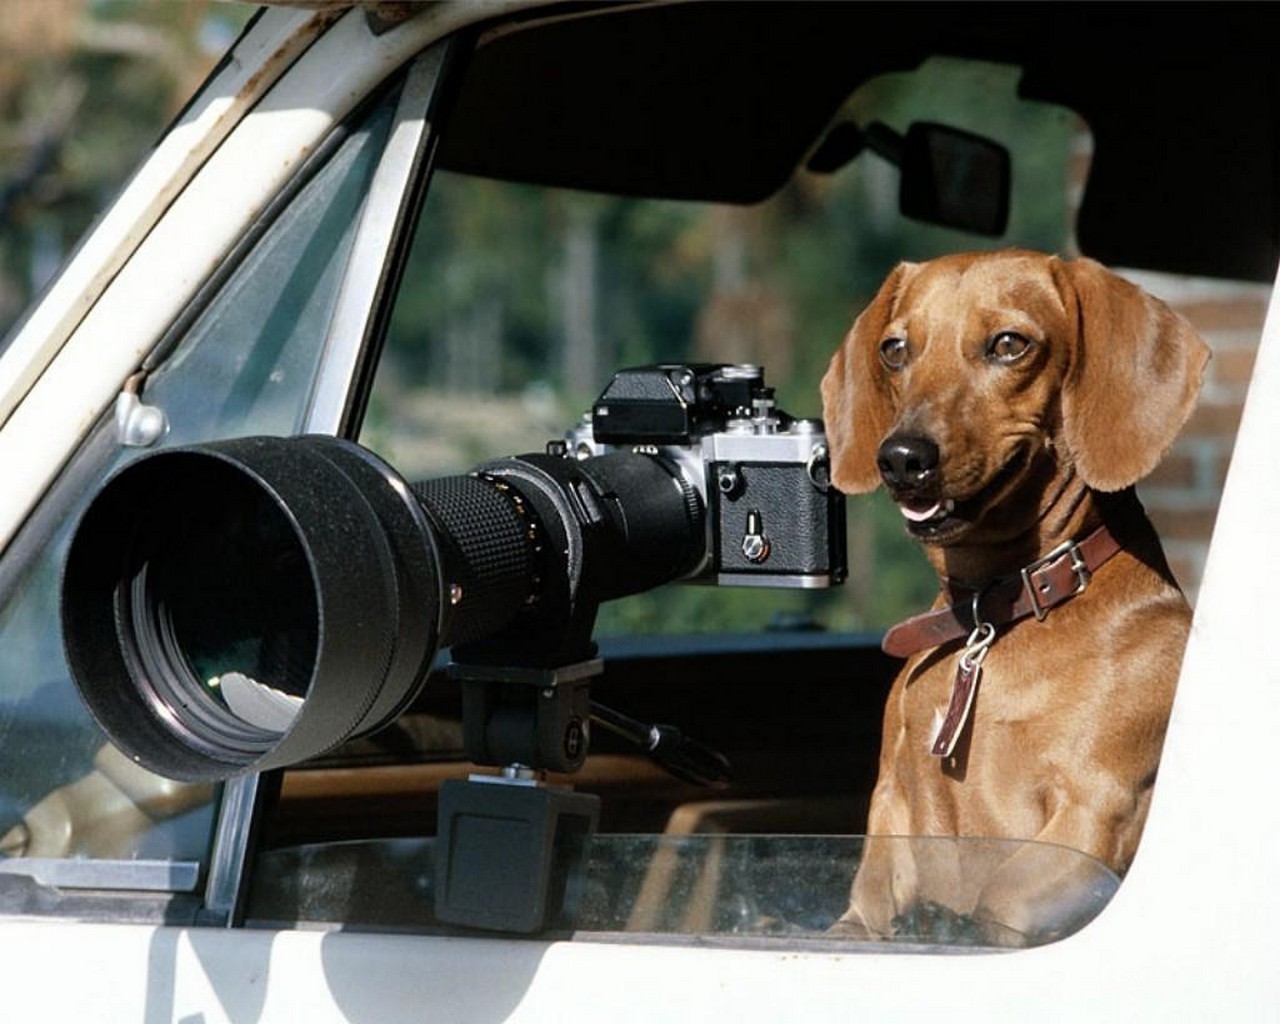 dogs dog lens looking canine pet equipment portrait car mammal one technology sitting zoom outdoors miniskirt puppy movie indoors